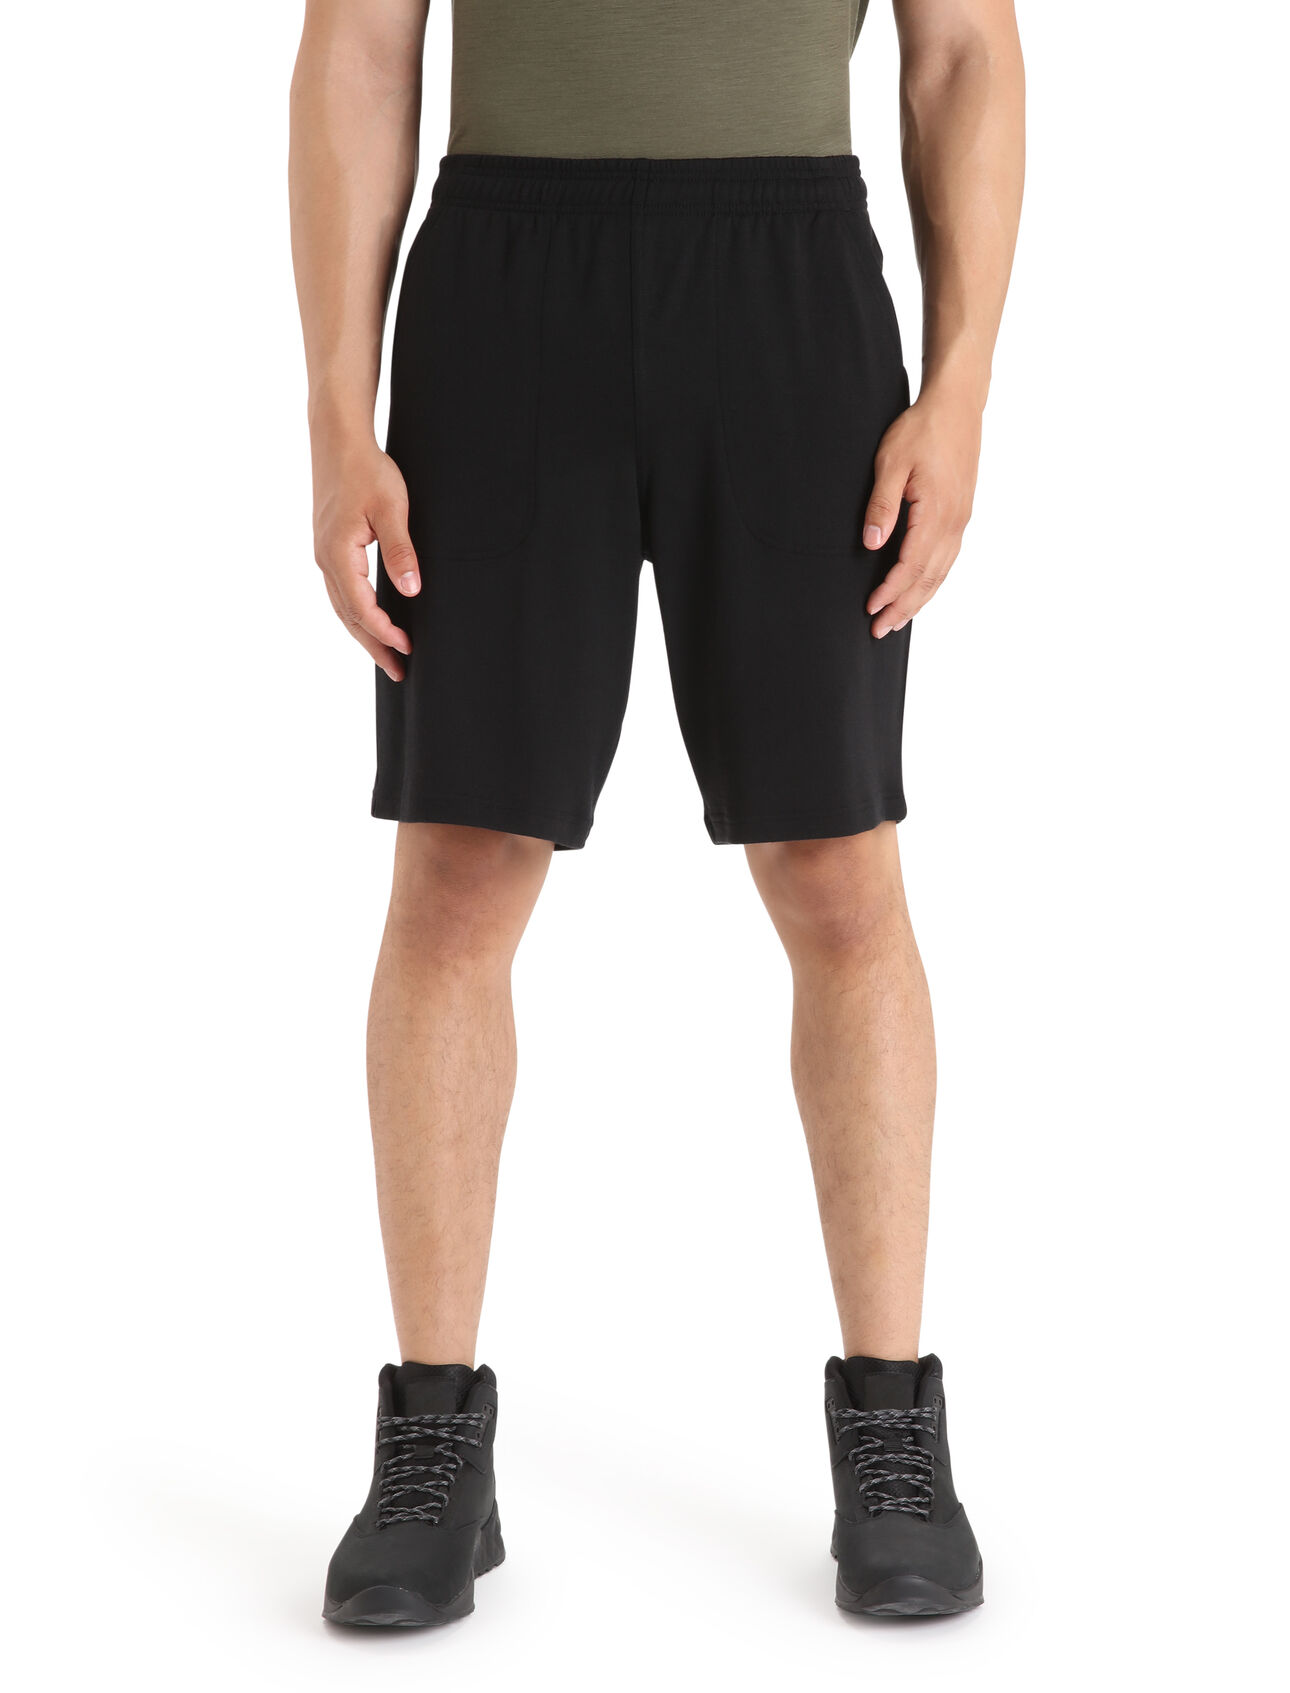 Mens Merino Shifter 9'' Shorts Classic sweat shorts with a modern twist thanks to soft, 100% merino wool terry fabric, the Shifter Shorts are styled and dialed for everyday comfort.